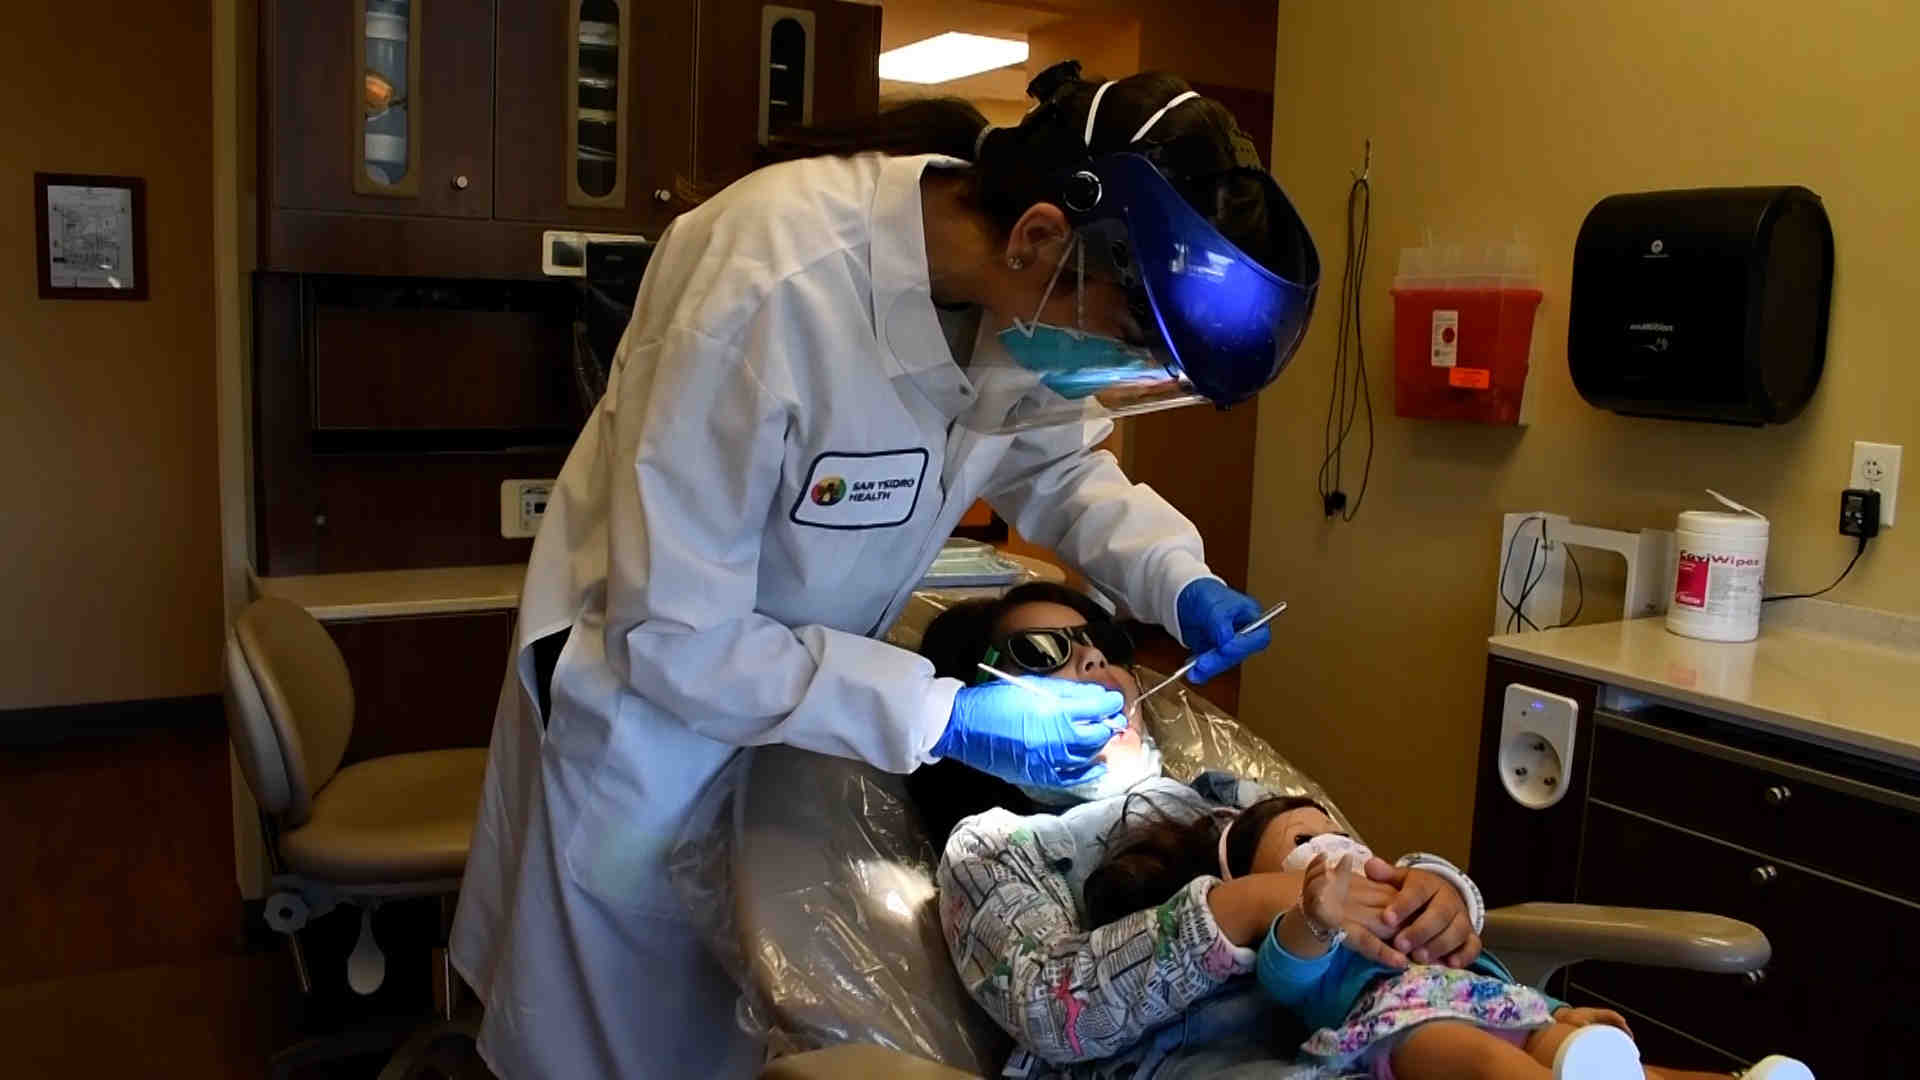 At what age should a child begin seeing a pediatric dentist?